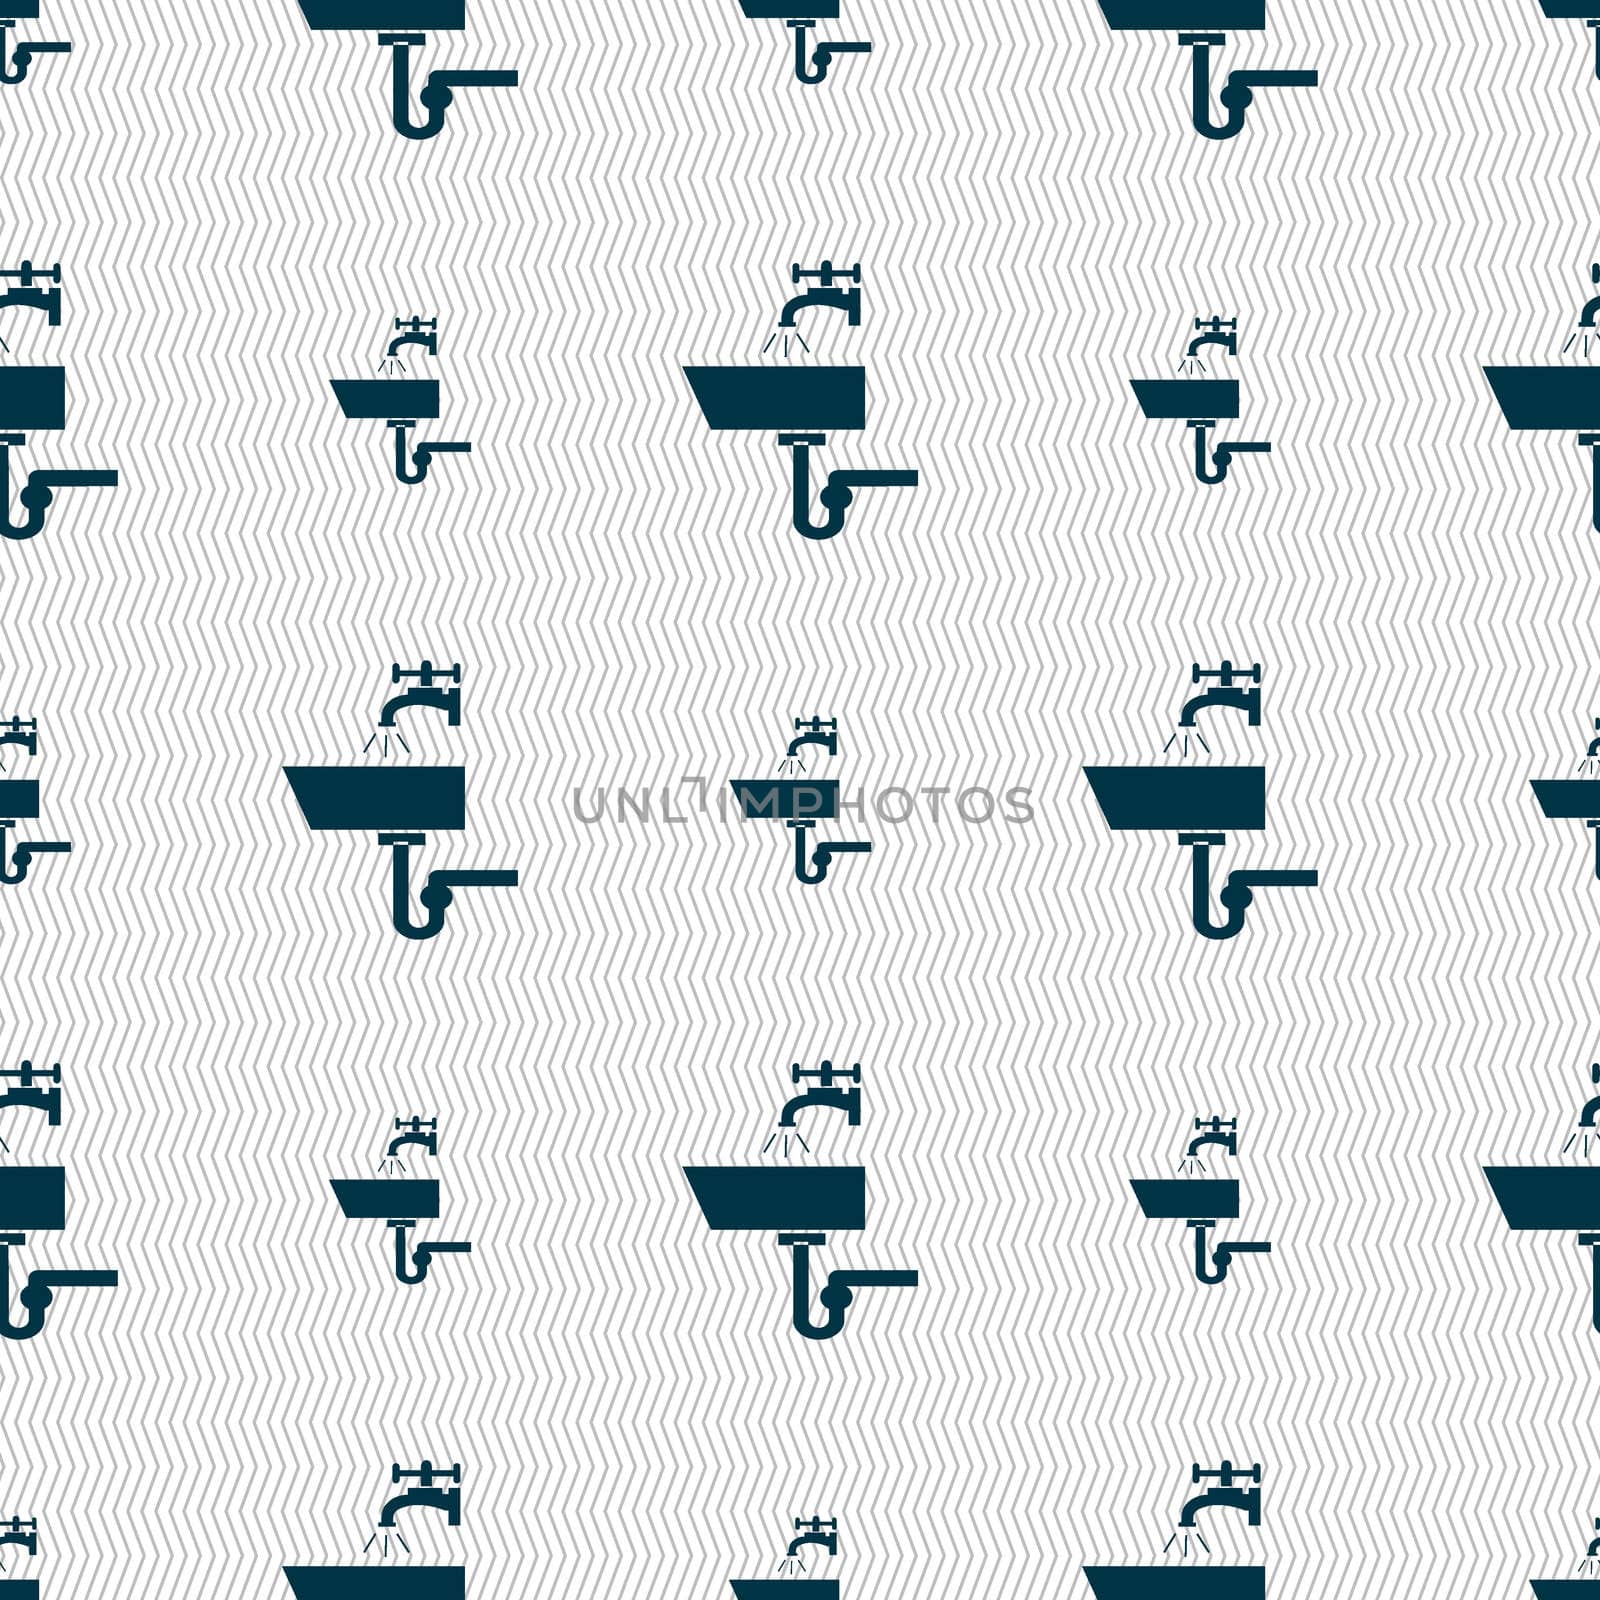 Washbasin icon sign. Seamless abstract background with geometric shapes. illustration